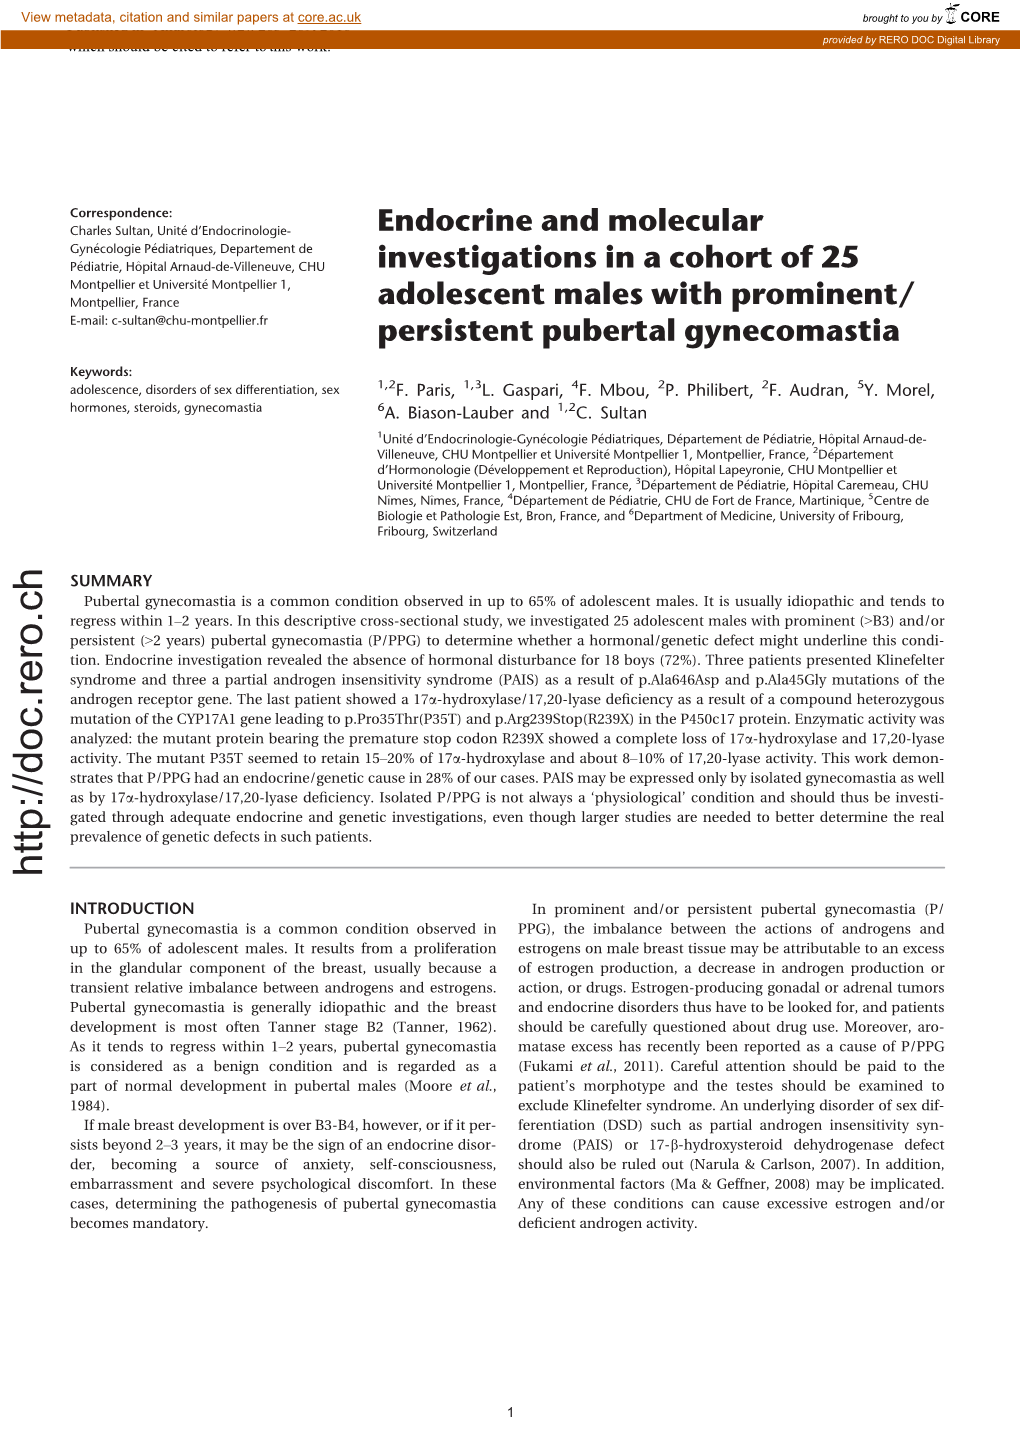 Endocrine and Molecular Investigations in a Cohort of 25